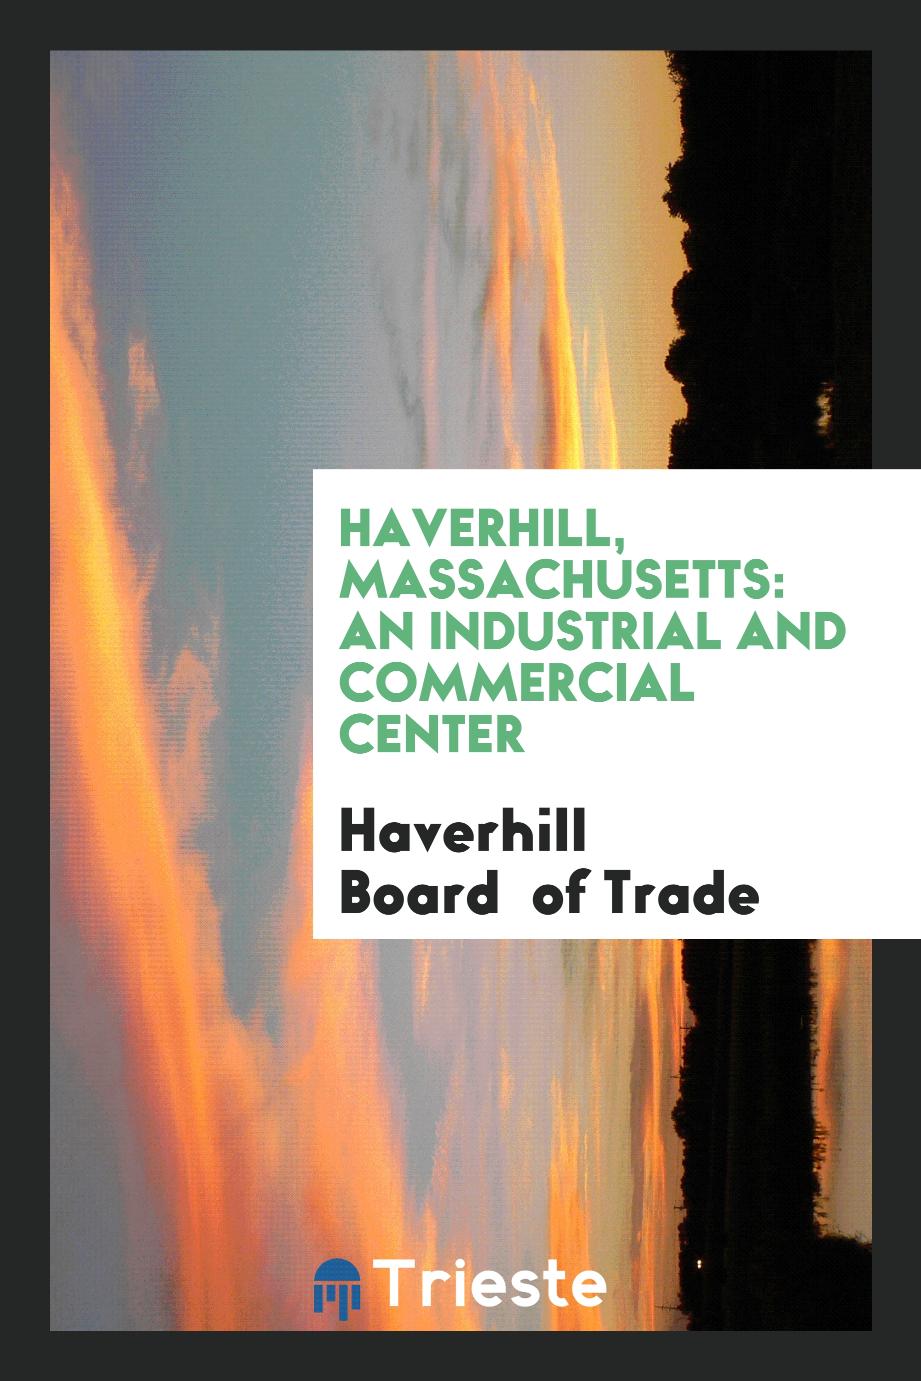 Haverhill, Massachusetts: An Industrial and Commercial Center